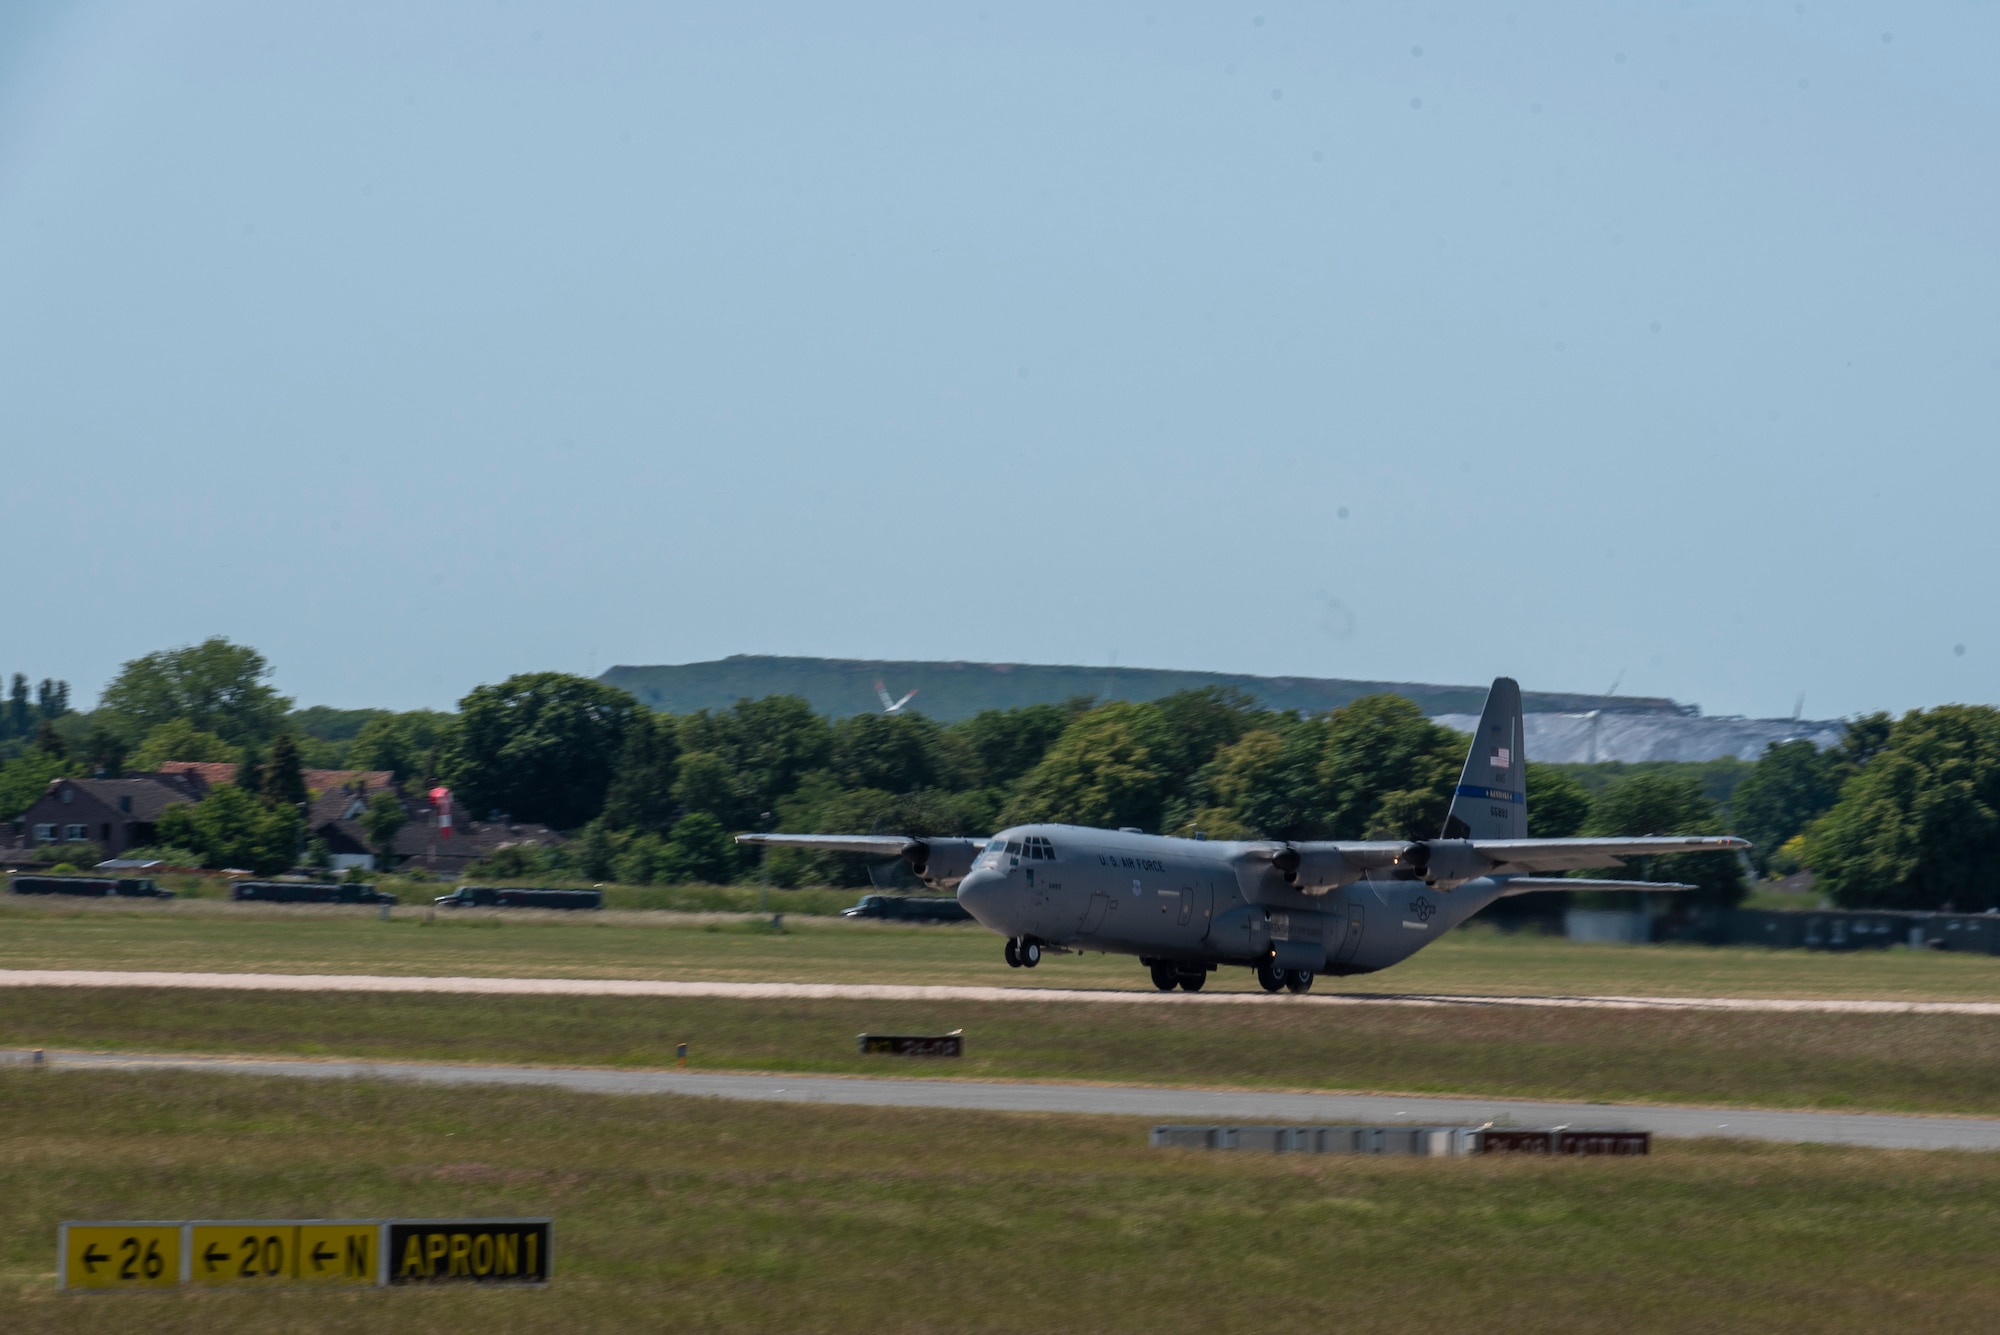 A U.S. Air Force C-130J Super Hercules aircraft operated by the 123rd Airlift Wing, Kentucky National Guard, lifts off during exercise Air Defender 2023 at Wunstorf Air Base, Wunstorf, Germany, June 4, 2023. Exercise AD23 integrates both U.S. and Allied airpower to defend shared values, while leveraging and strengthening vital partnerships to deter aggression around the world. (U.S. Air National Guard photo by Staff Sgt. Paul Helmig)